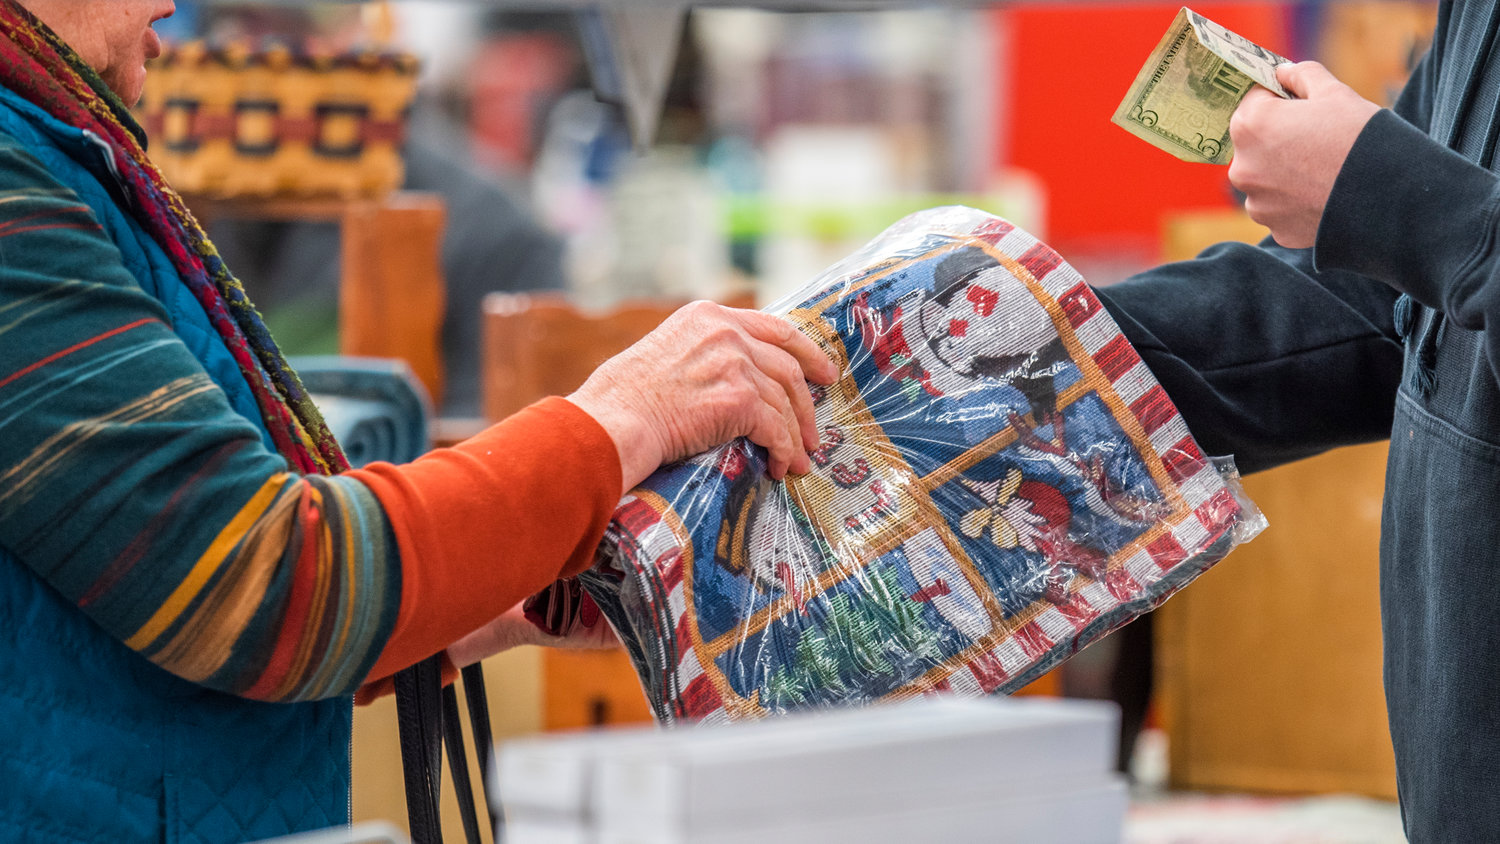 Money is exchanged in the grandstands during the Spring Community Garage Sale Saturday morning at the Southwest Washington Fairgrounds in Centralia.